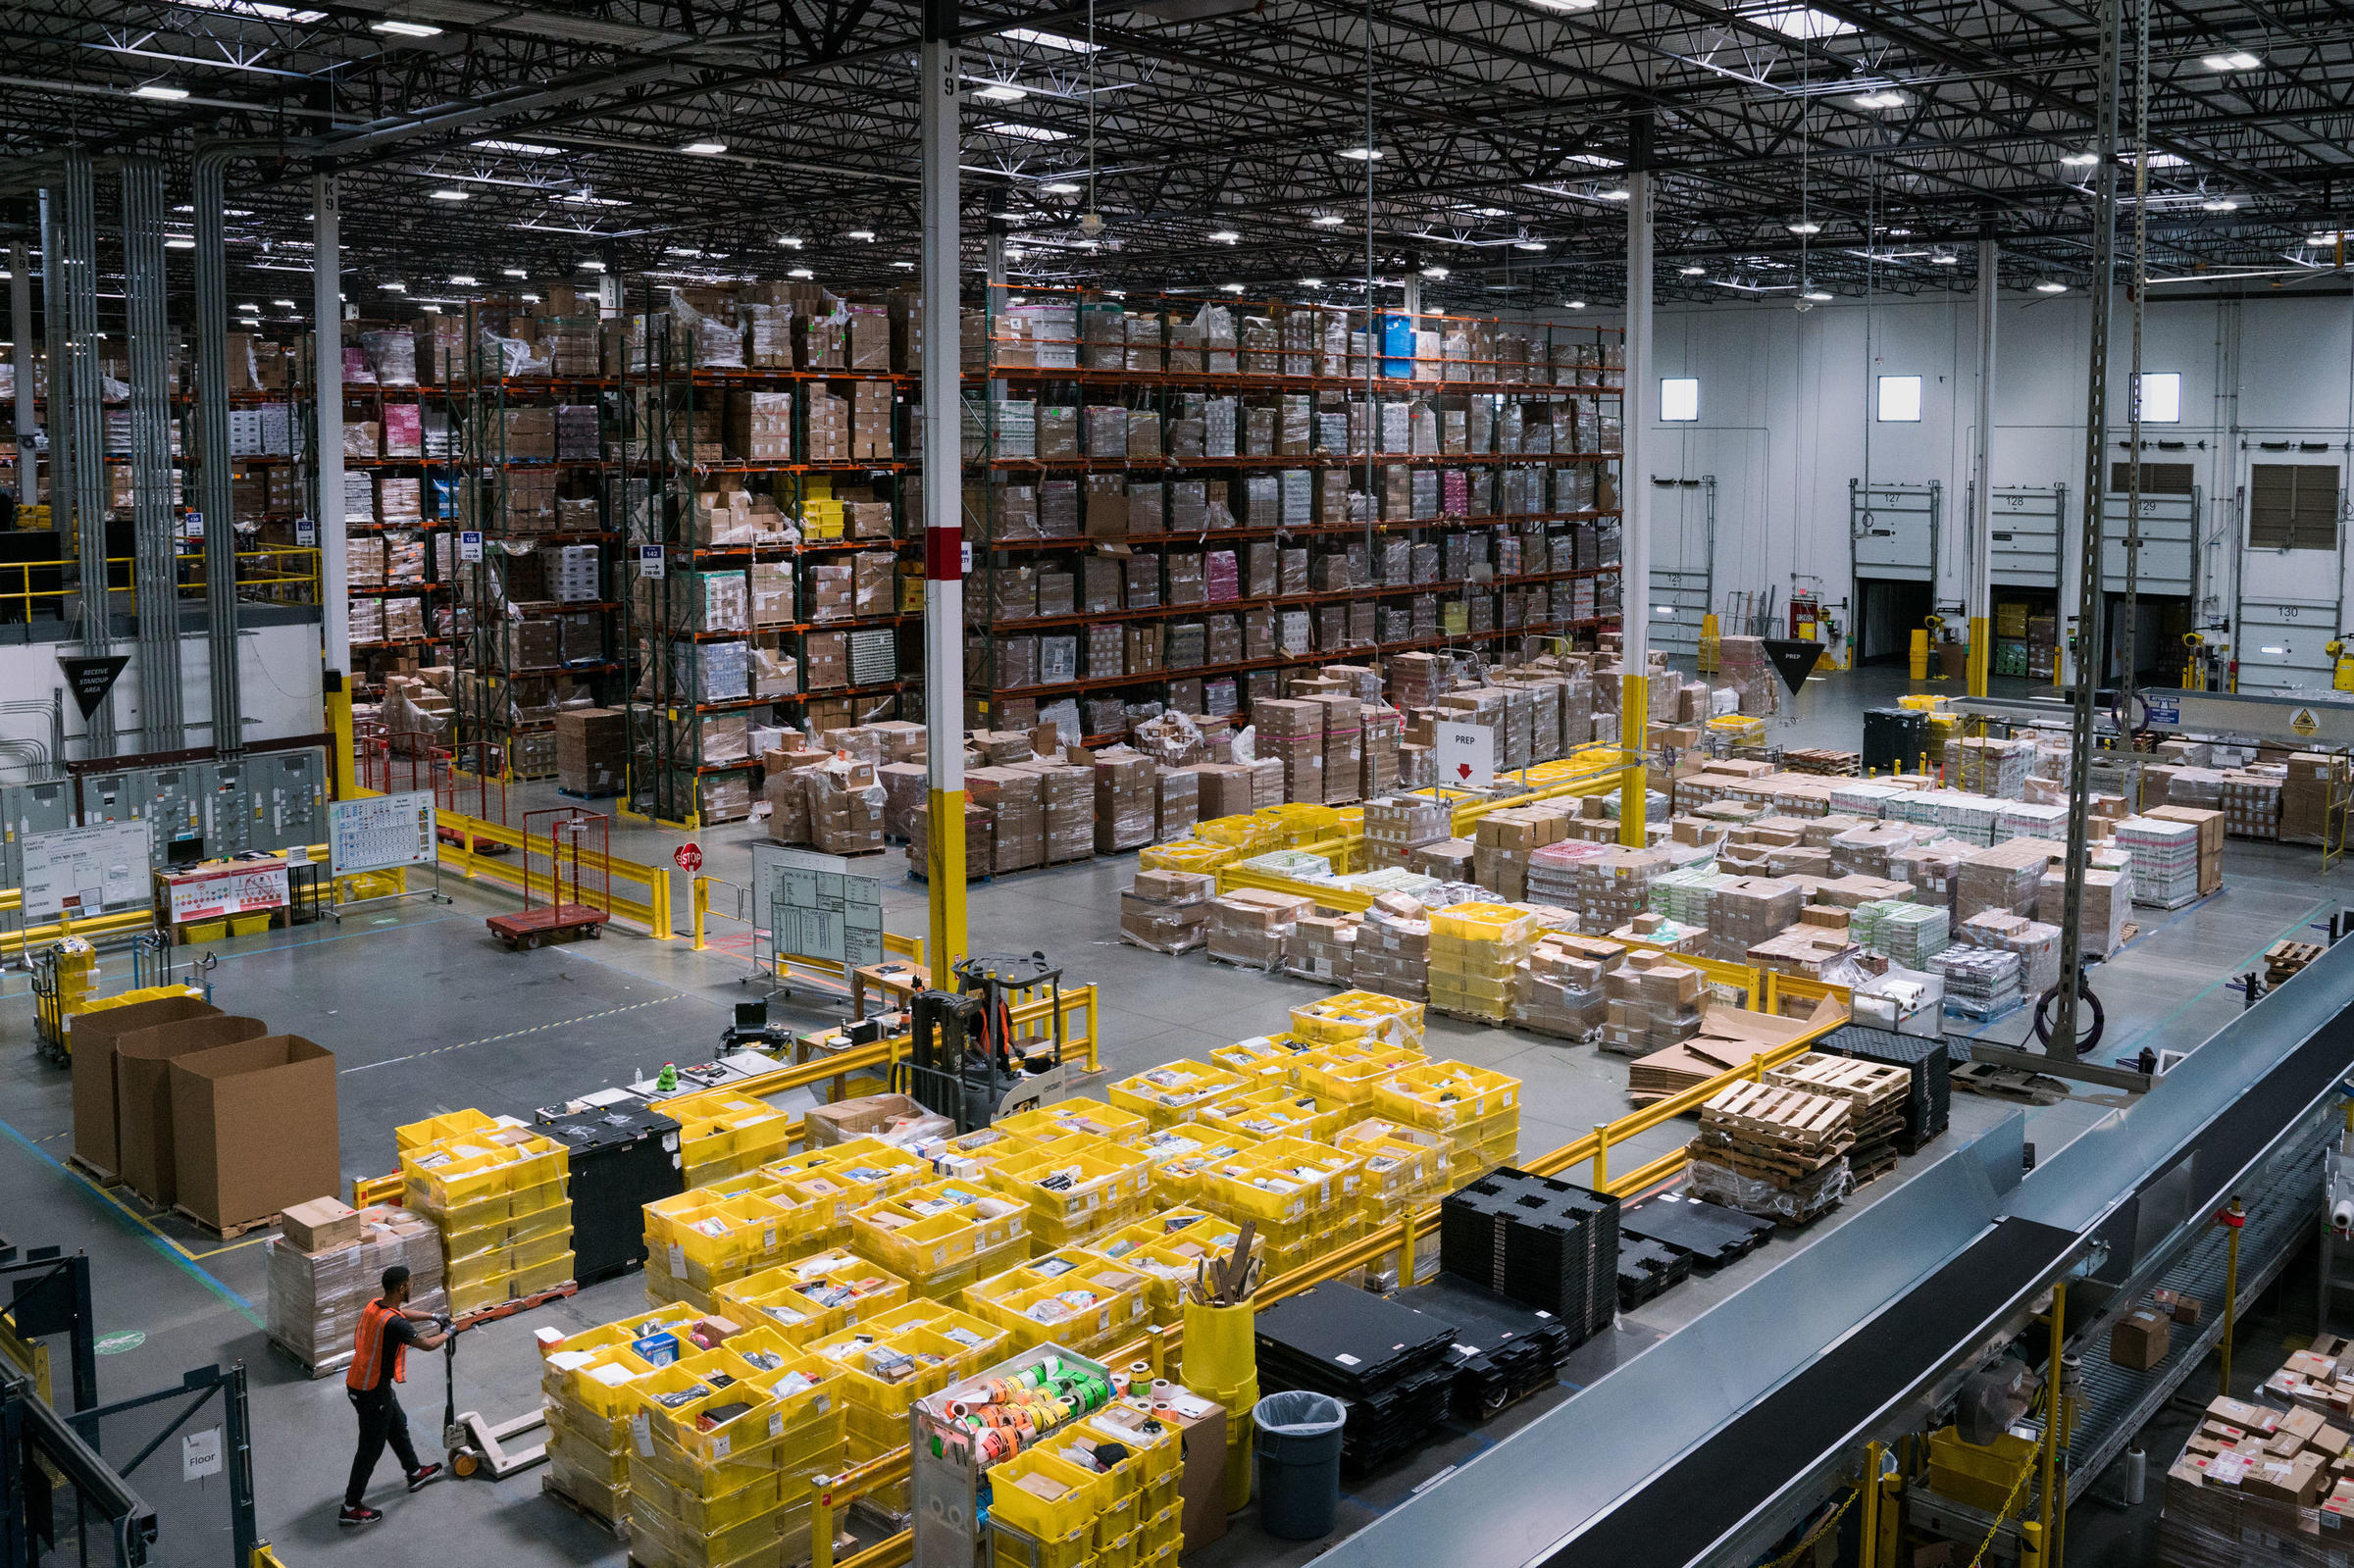 Amazon has built a massive warehousing footprint around the country, includ...